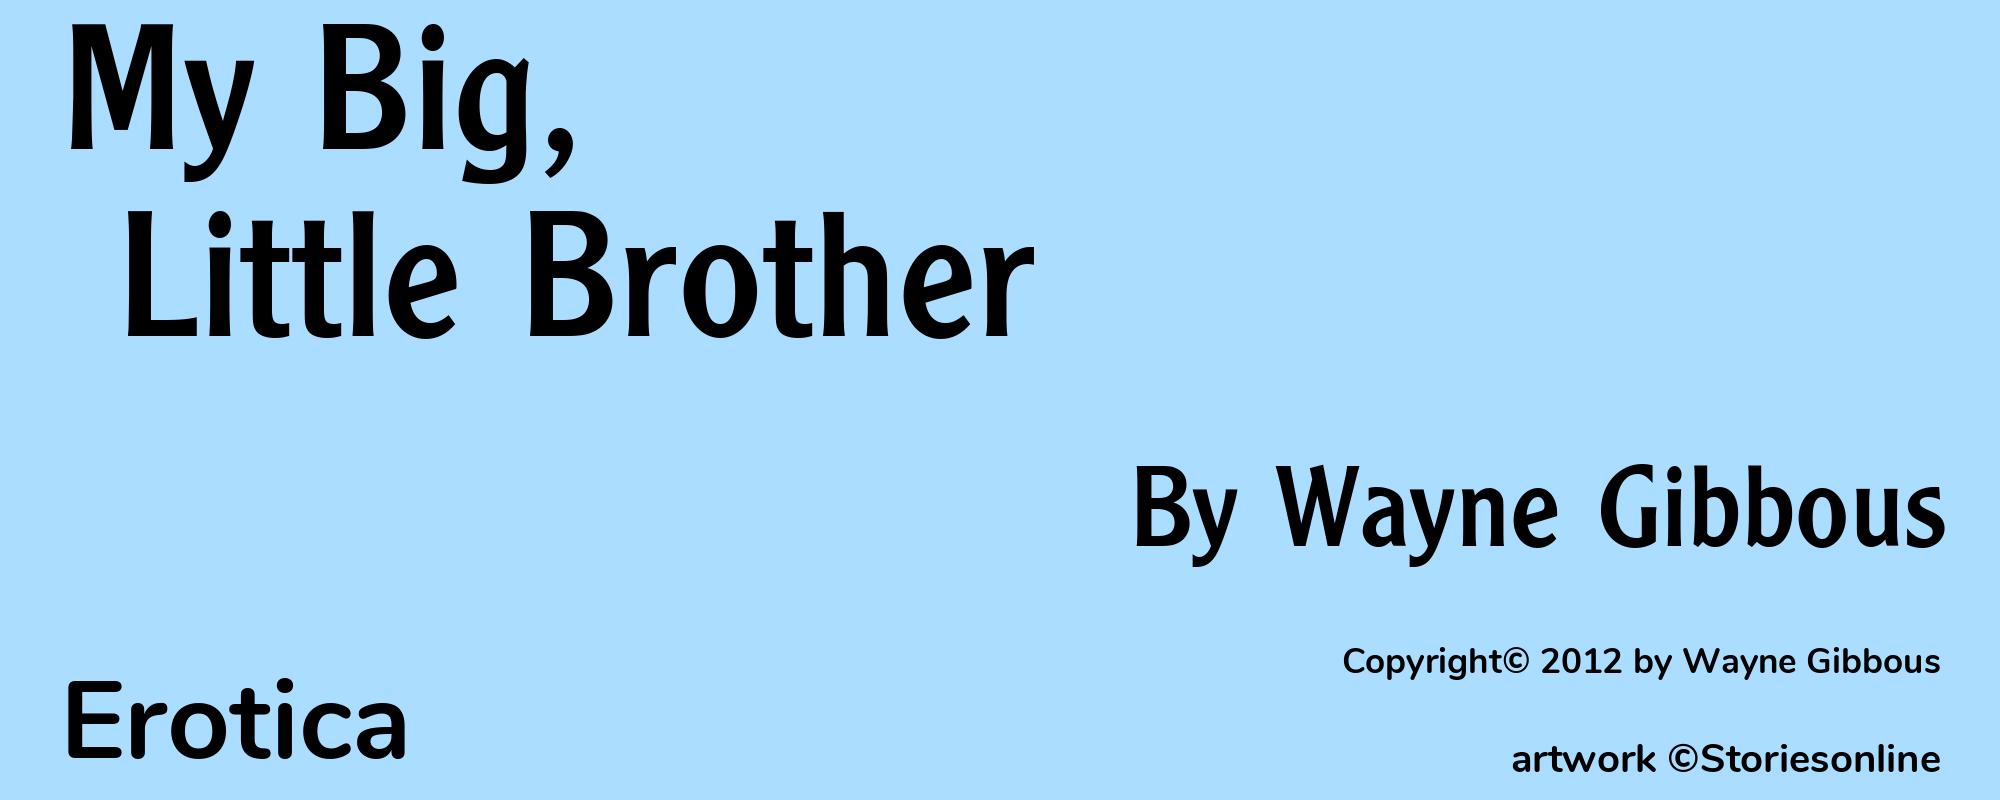 My Big, Little Brother - Cover